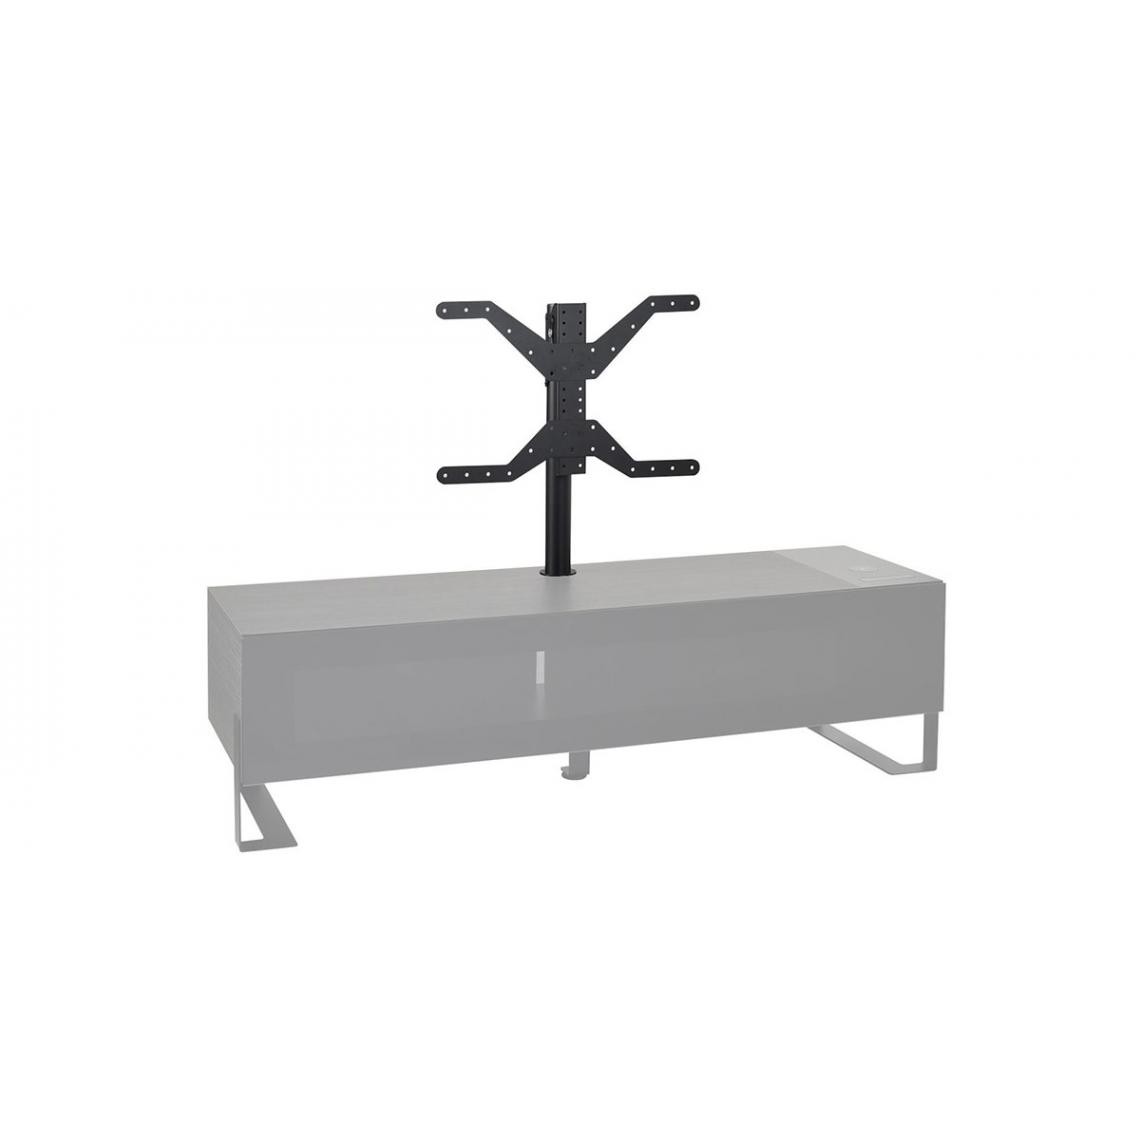 Erard - Erard Naga - Colonne Support TV Inclinable et Orientable - Support mural